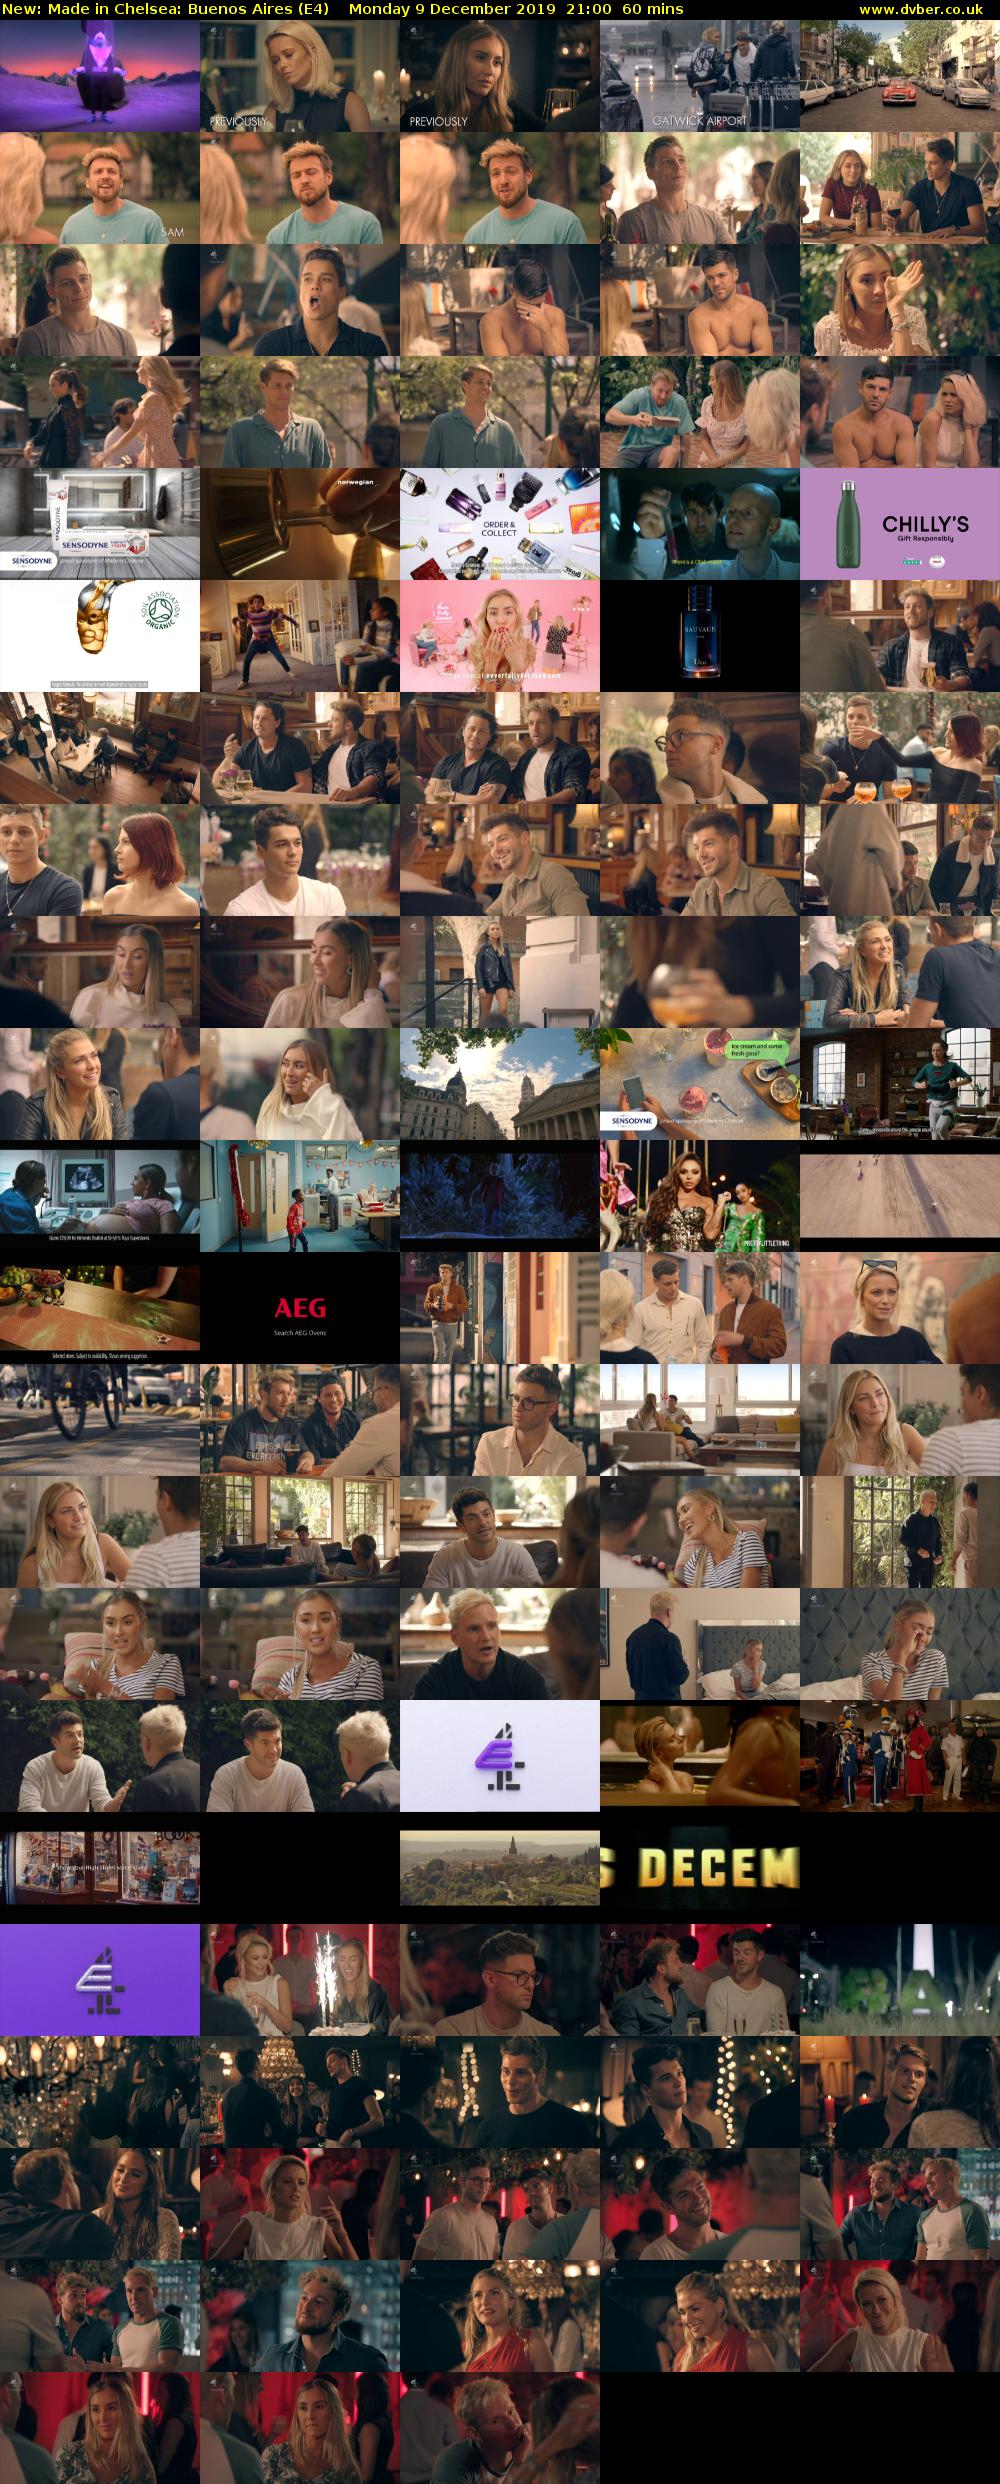 Made in Chelsea: Buenos Aires (E4) Monday 9 December 2019 21:00 - 22:00